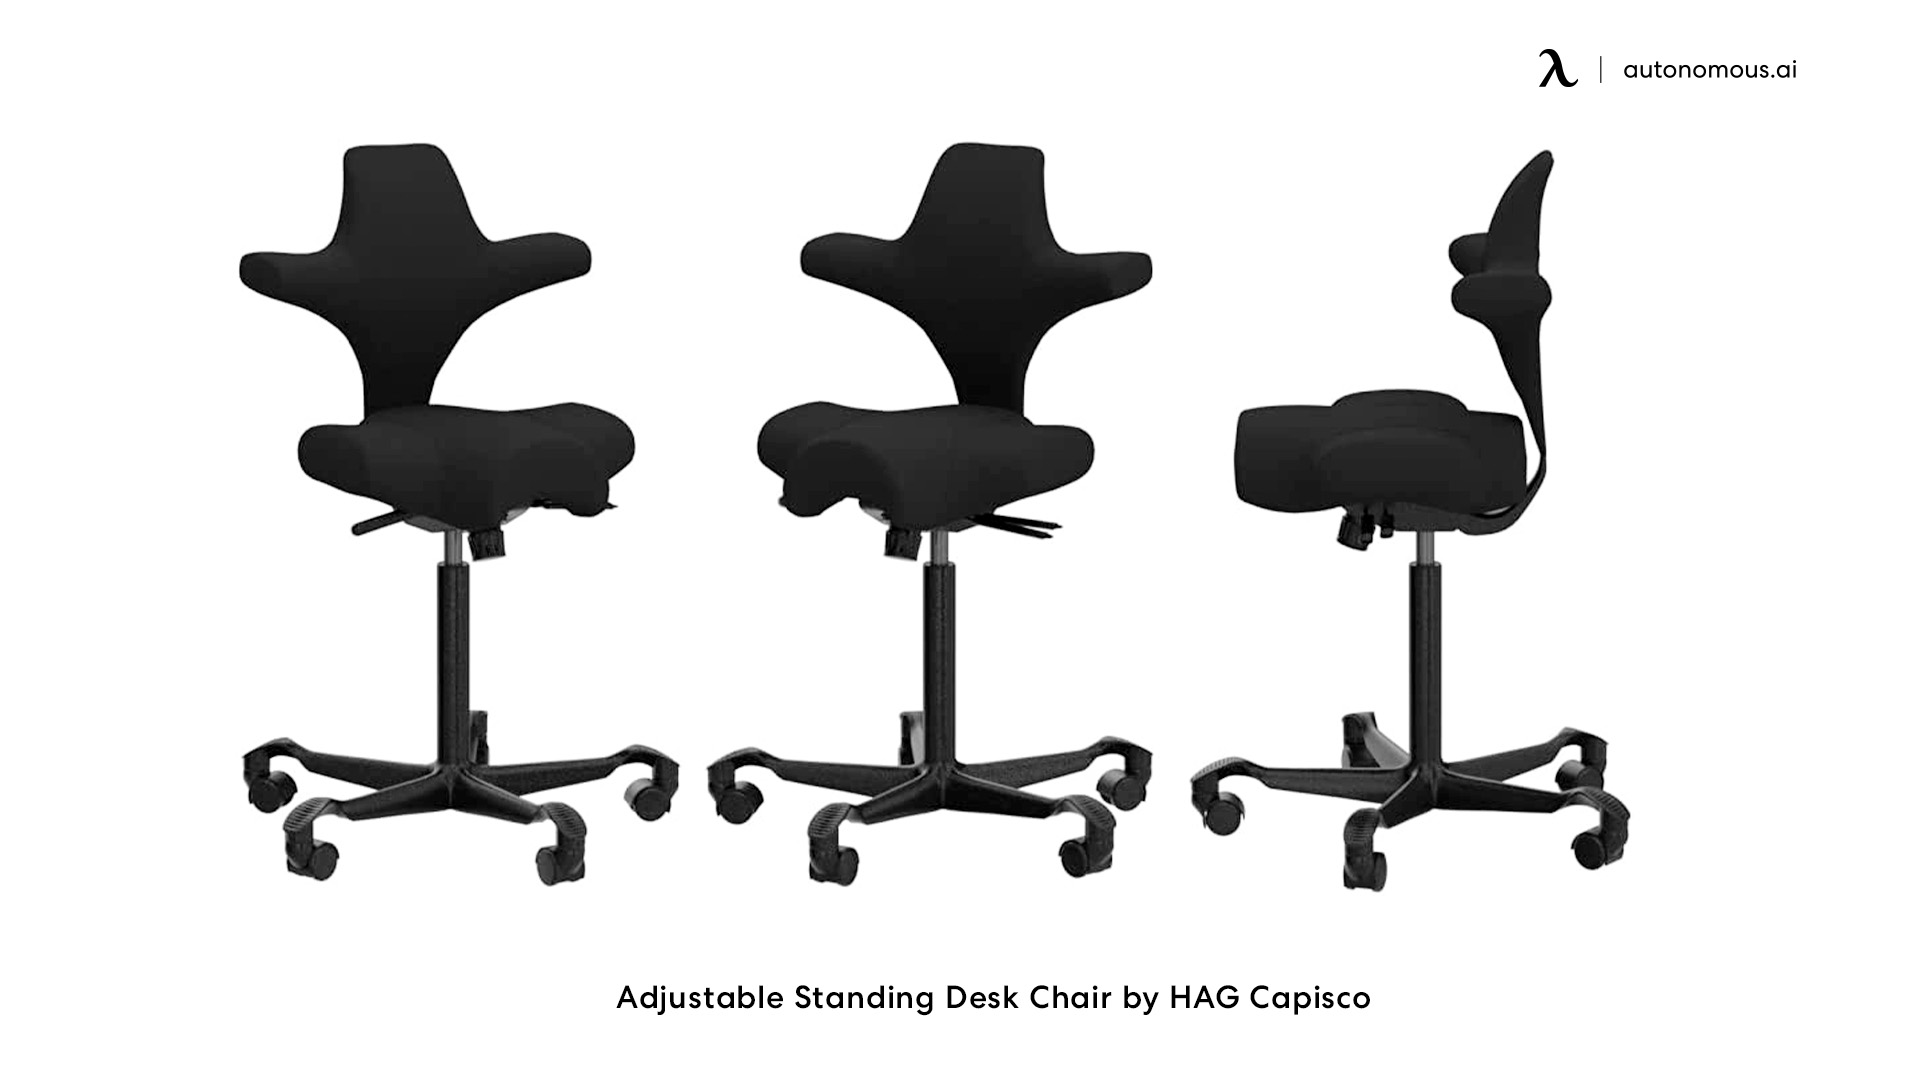 HAG Capisco extended height office chair